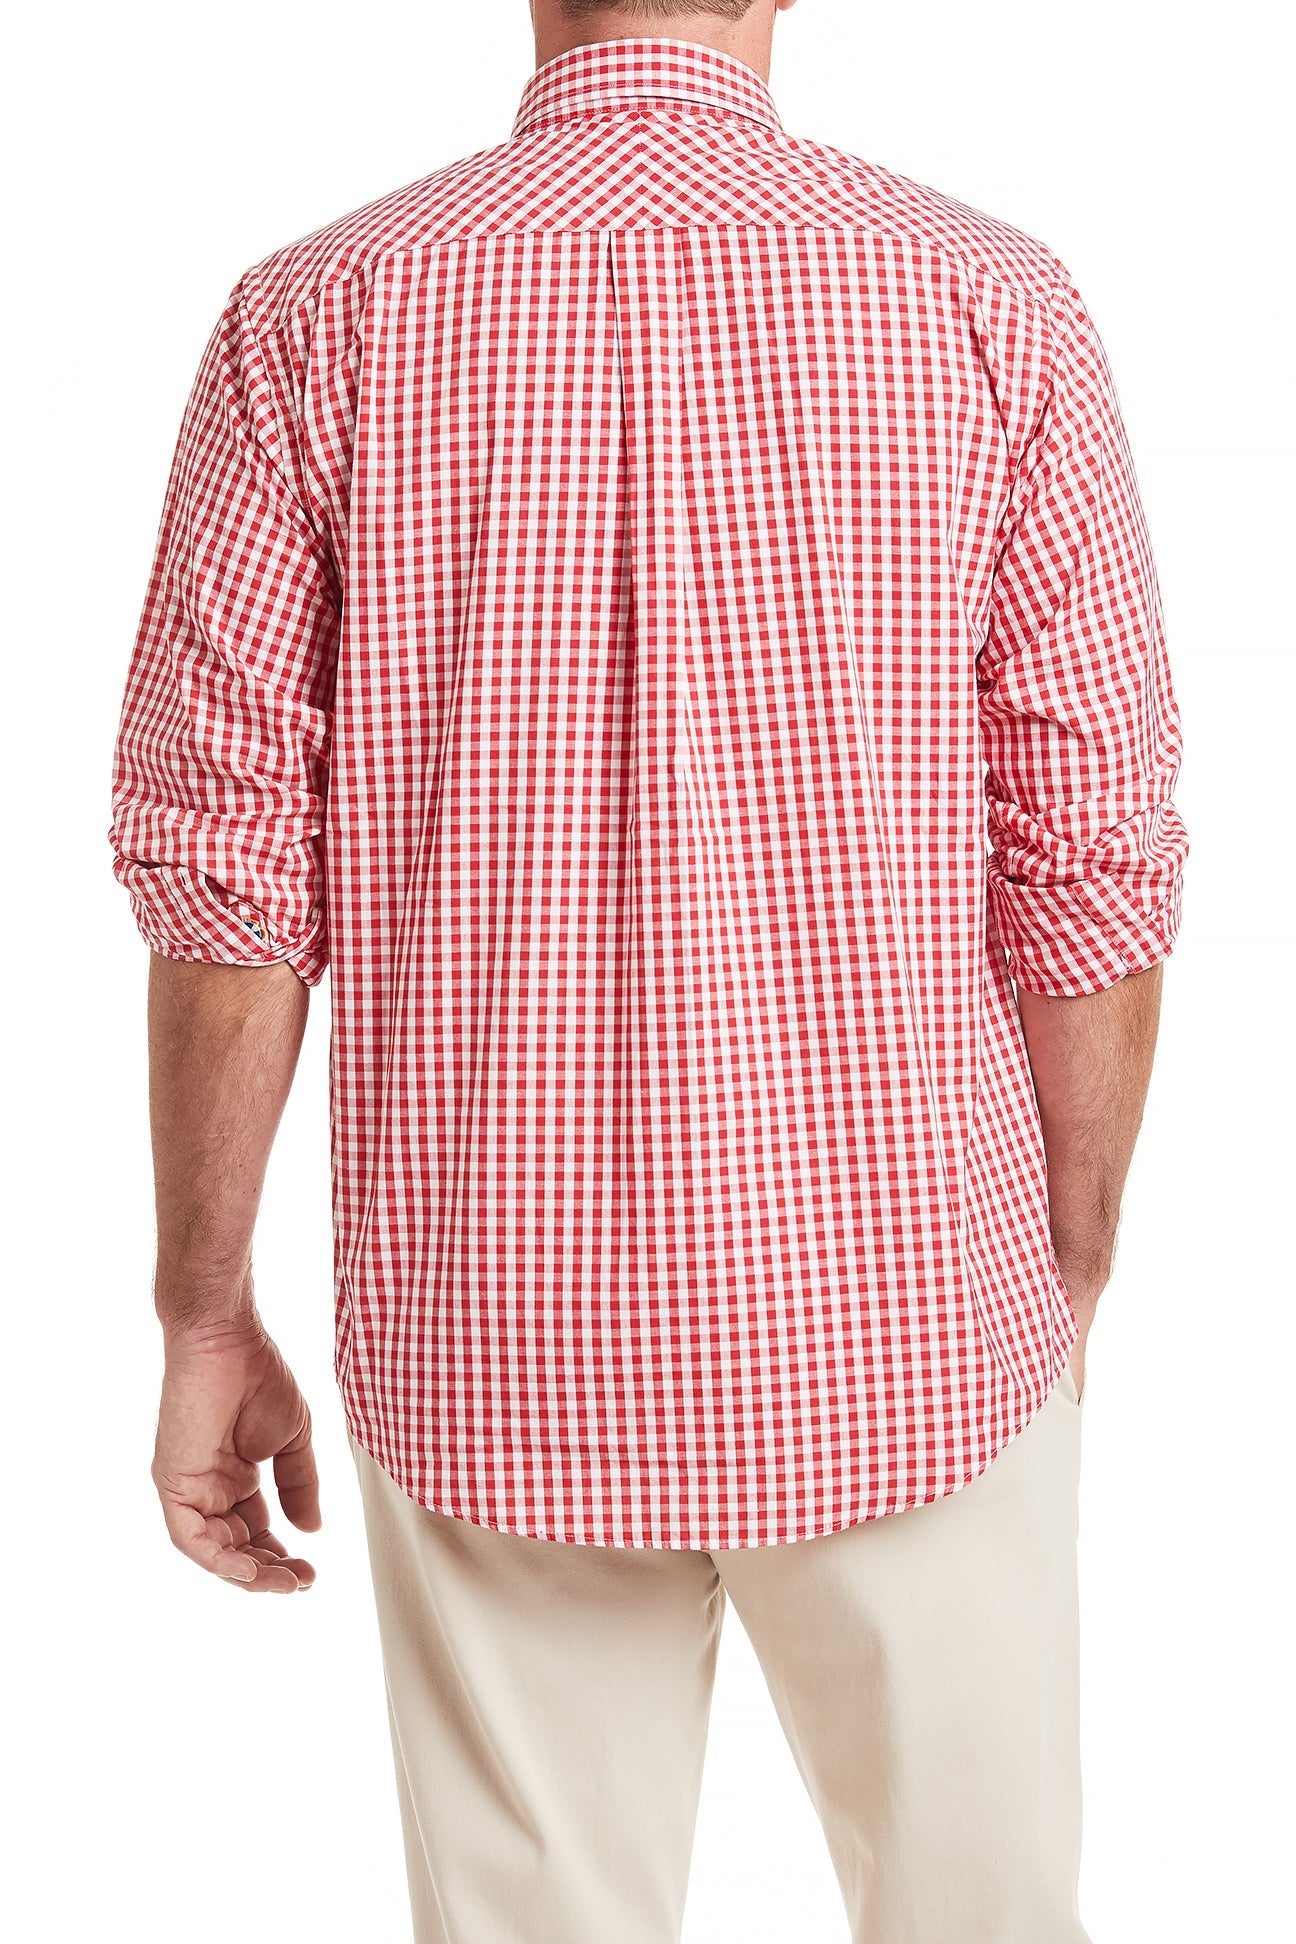 Chase Shirt Wide Gingham Red MENS SPORT SHIRTS Castaway Clothing